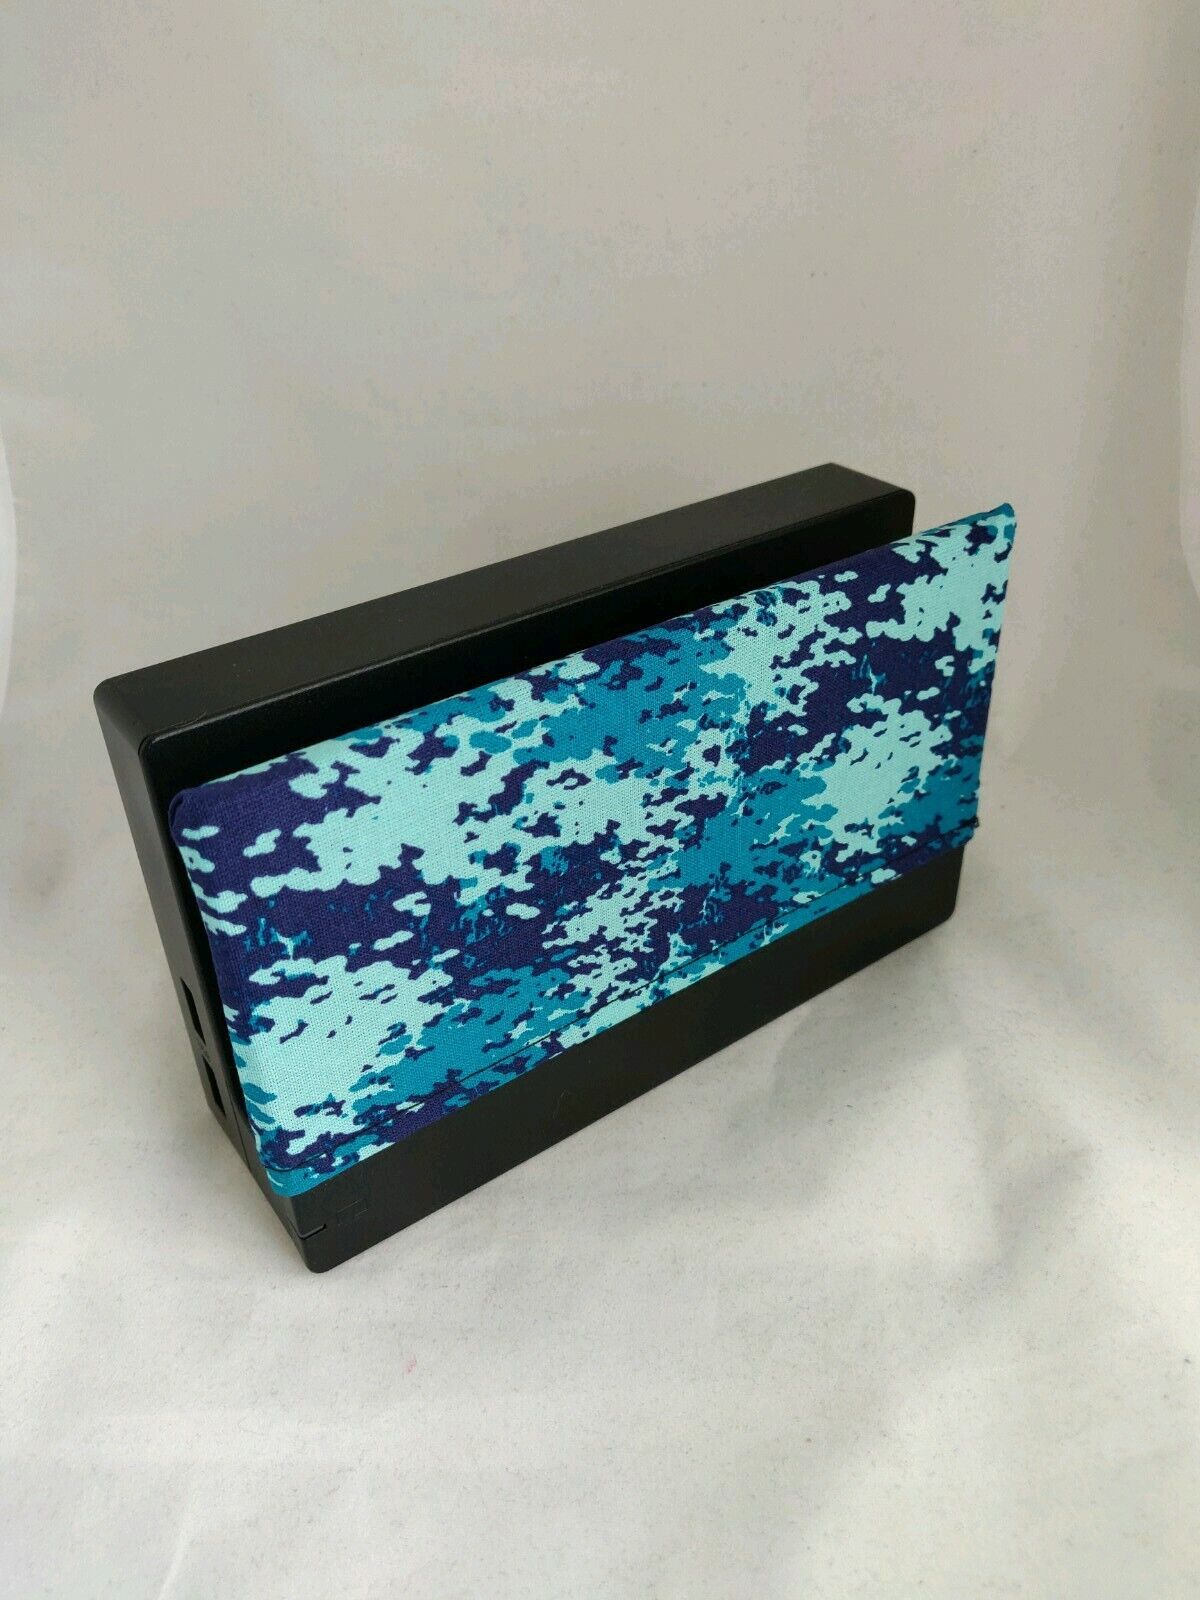 Nintendo Switch Dock Cover - Sock- Screen Jacksonville Mall Blue Protector Max 87% OFF